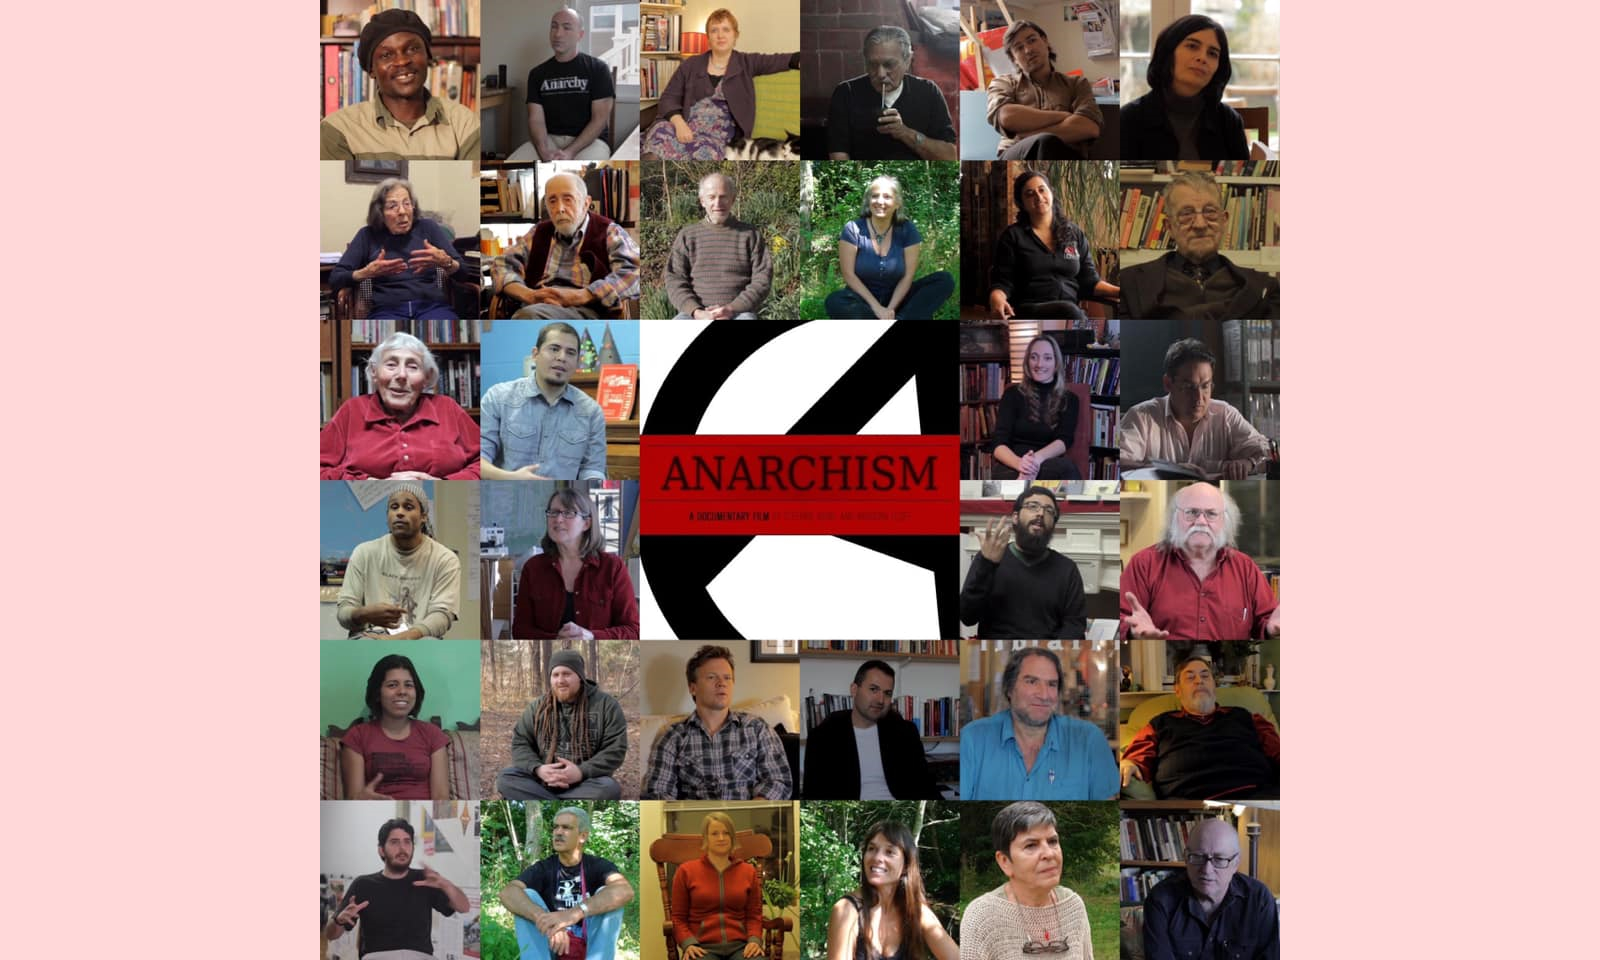 Anarchism - A Documentary cover image.jpg